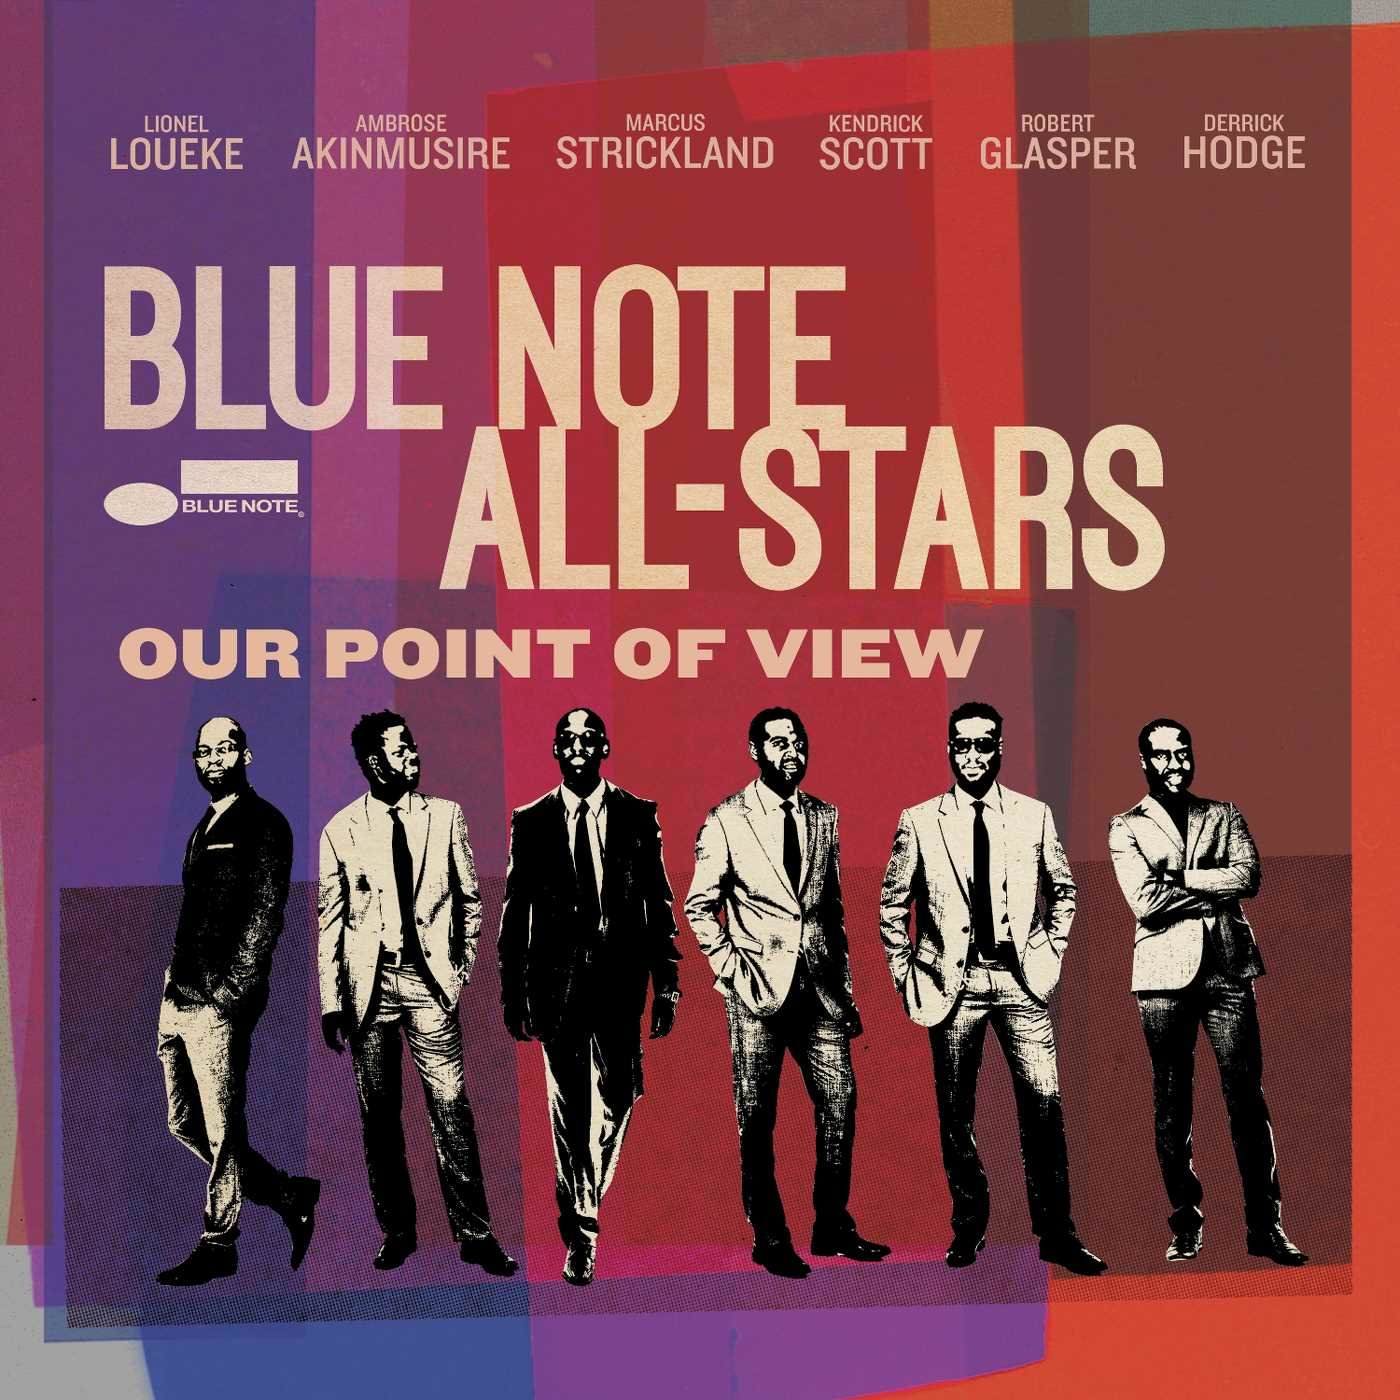 Blue Note All-Stars – Our Point of View (2017) [FLAC 24bit/96kHz]